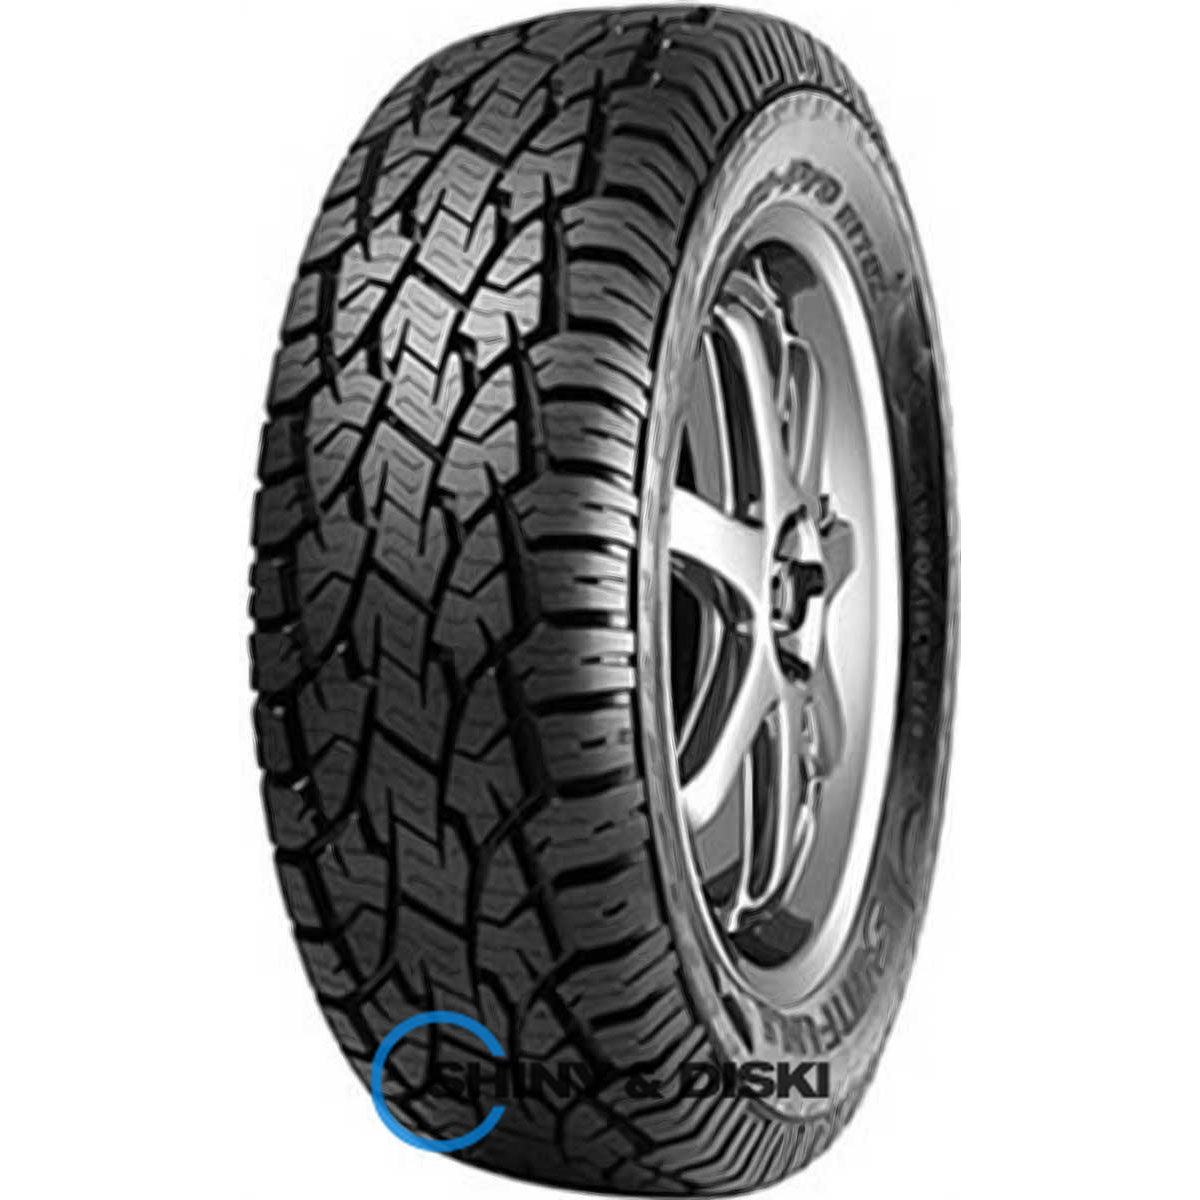 sunfull mont-pro at782 235/75 r15 104/101r